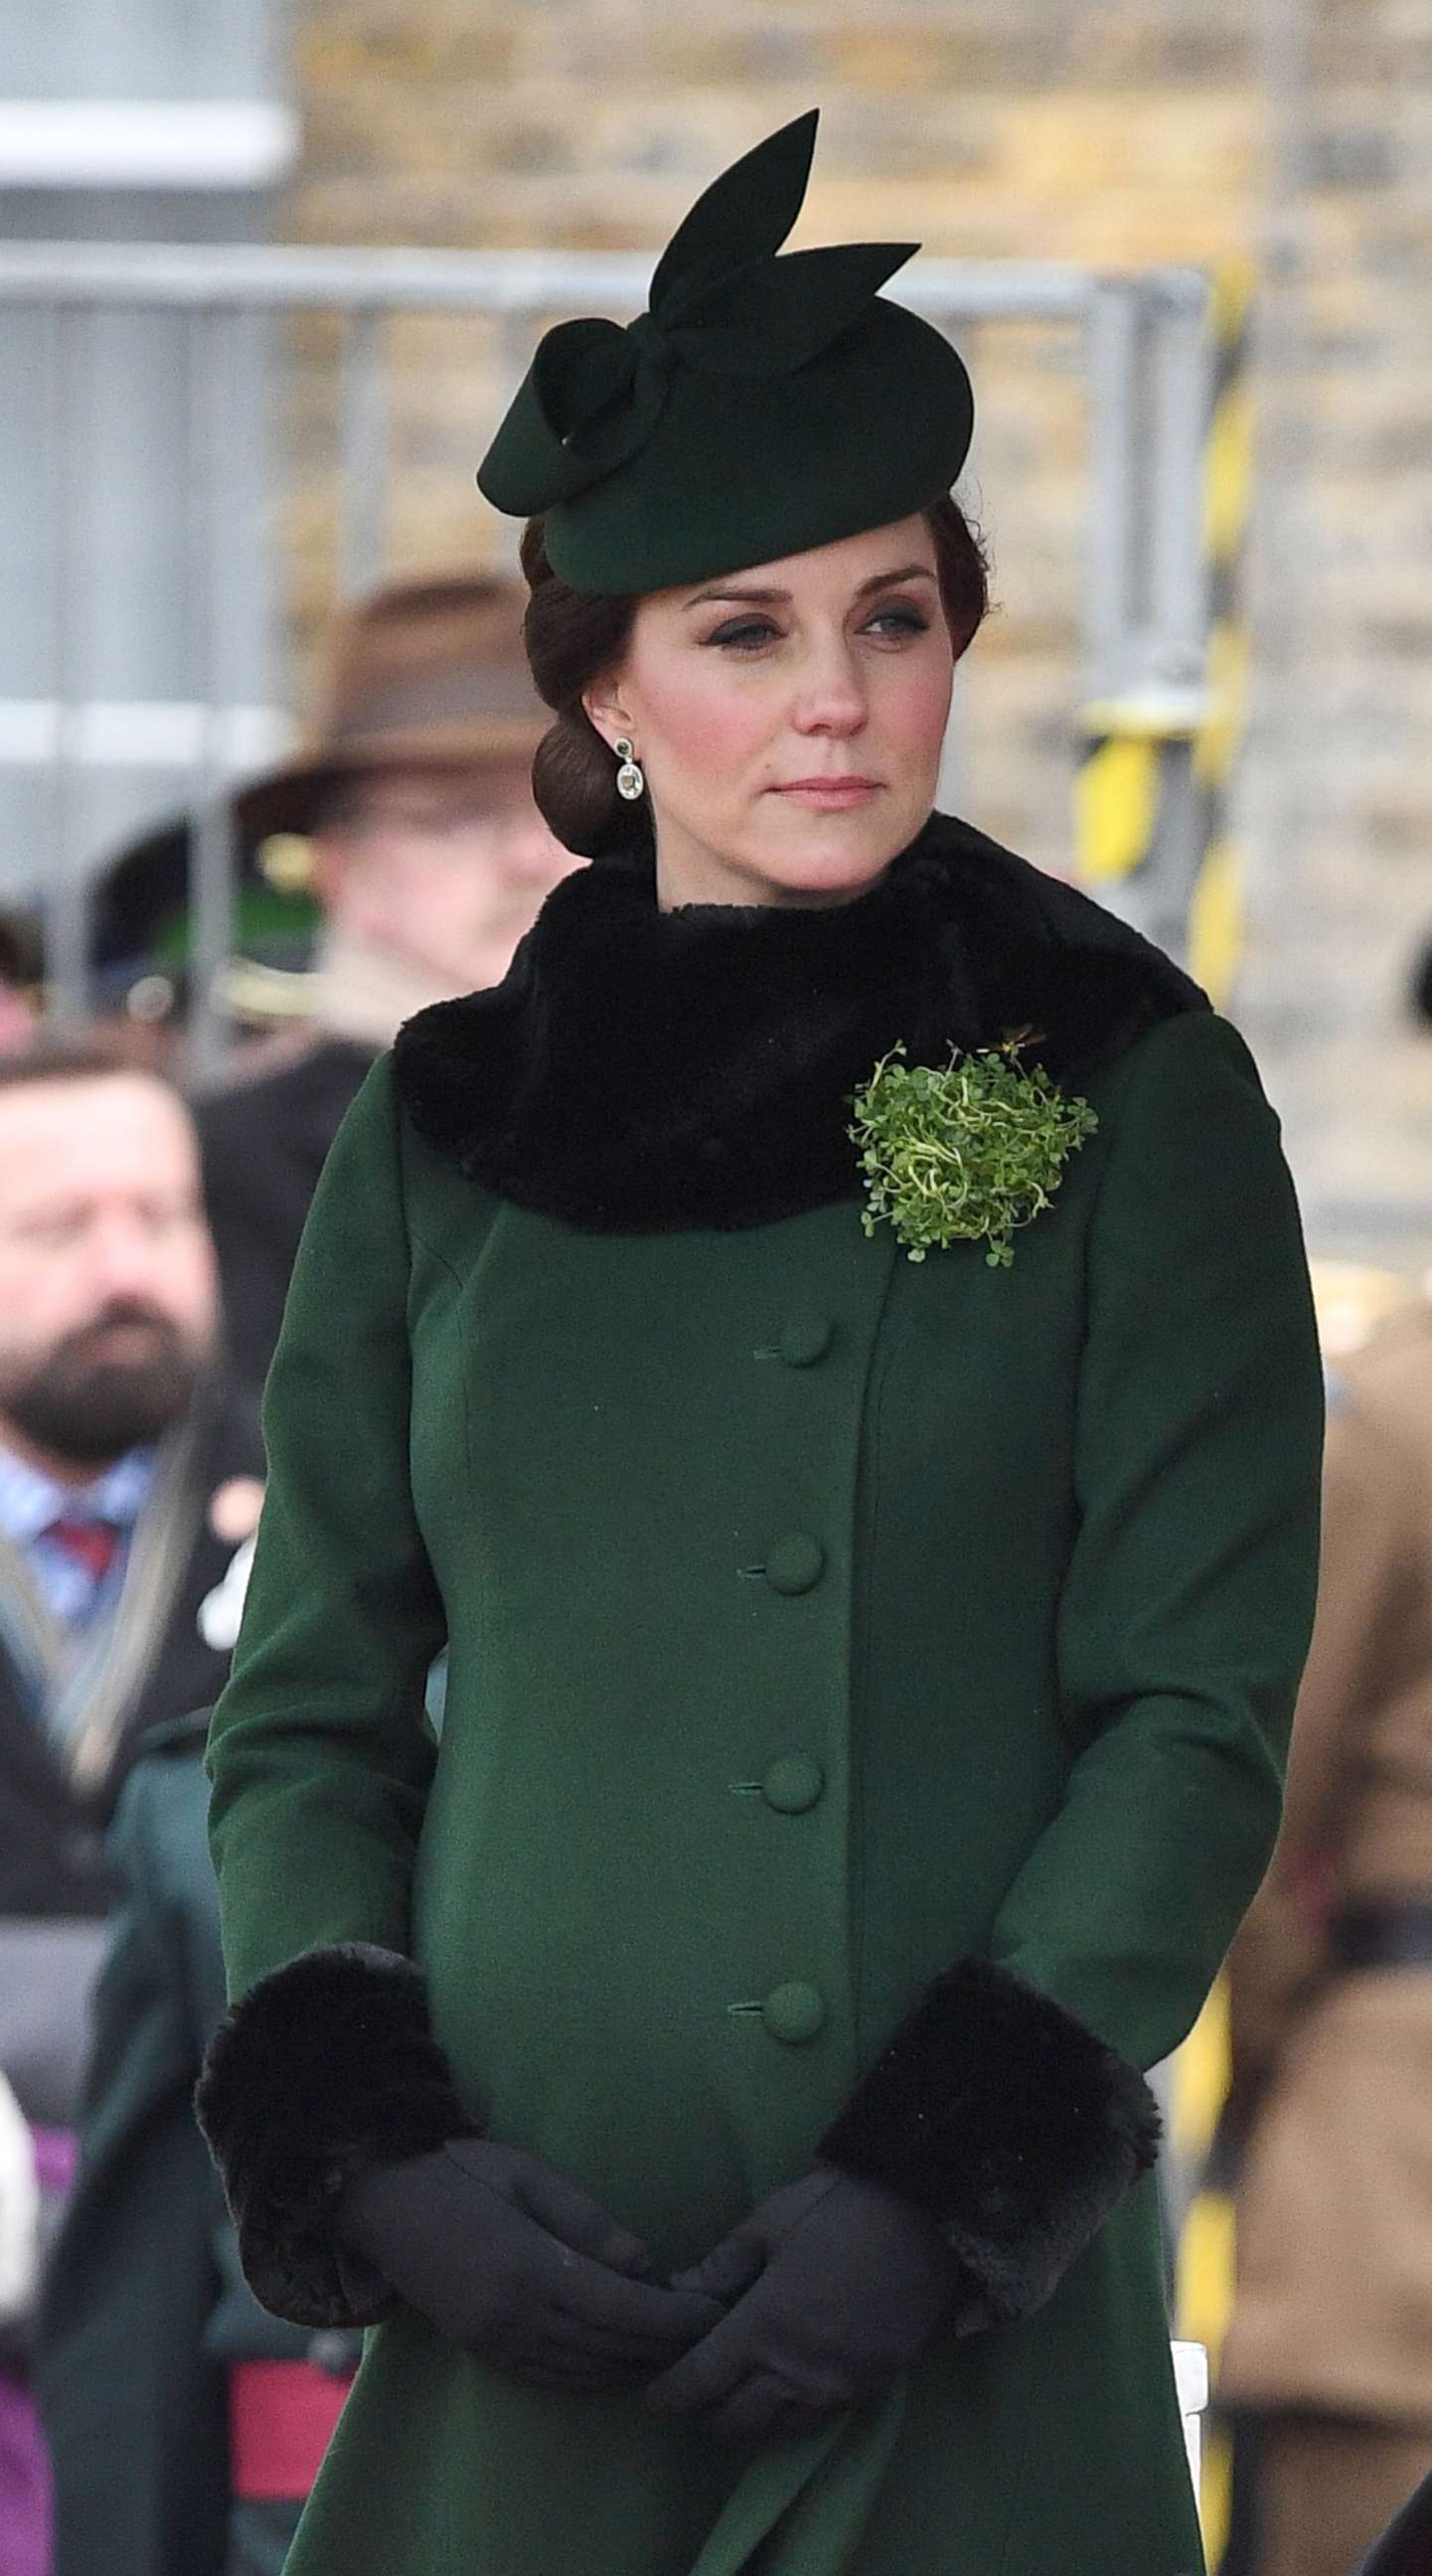 PHOTO: Duchess of Cambridge, Kate Middleton at the St. Patrick's Day Parade in Cavalry Barracks, Hounslow, West London, March 17, 2018.